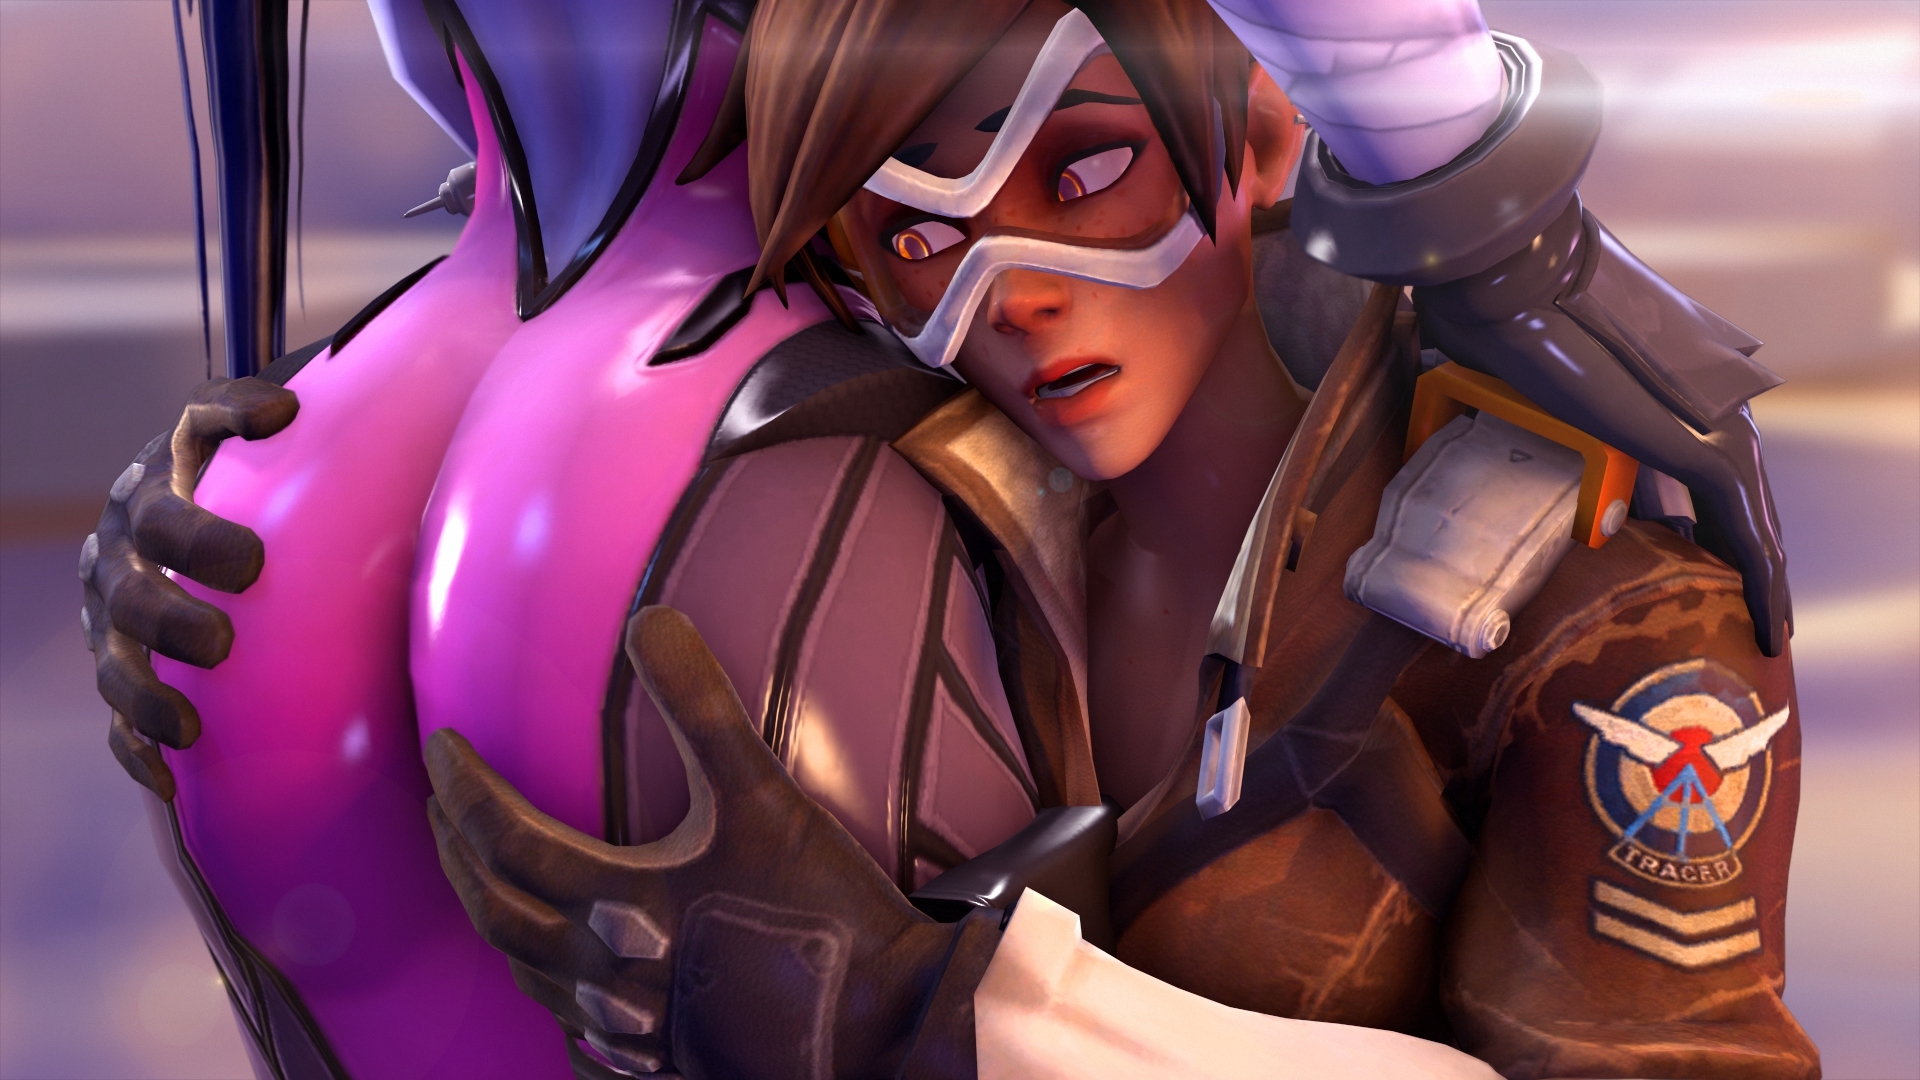 The overwatch pic collection that best adult free photos